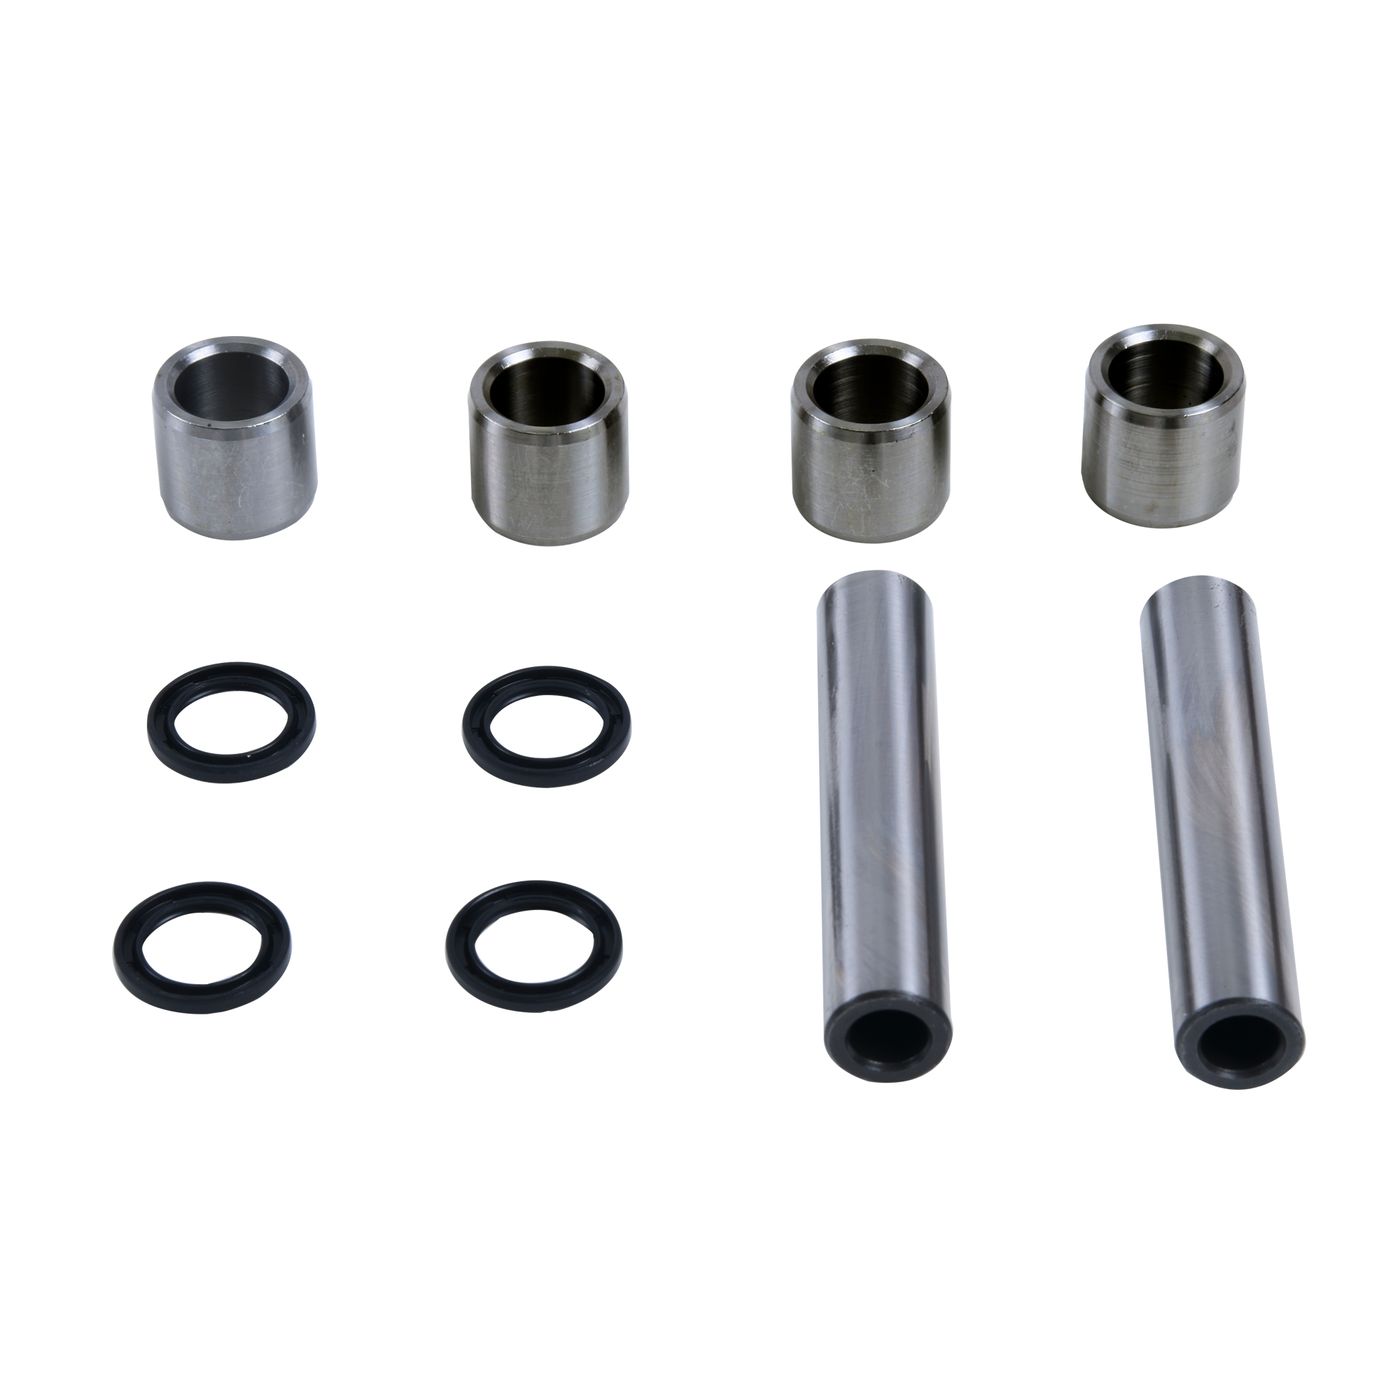 Wrp Rear Ind. Suspension Kits - WRP501228 image